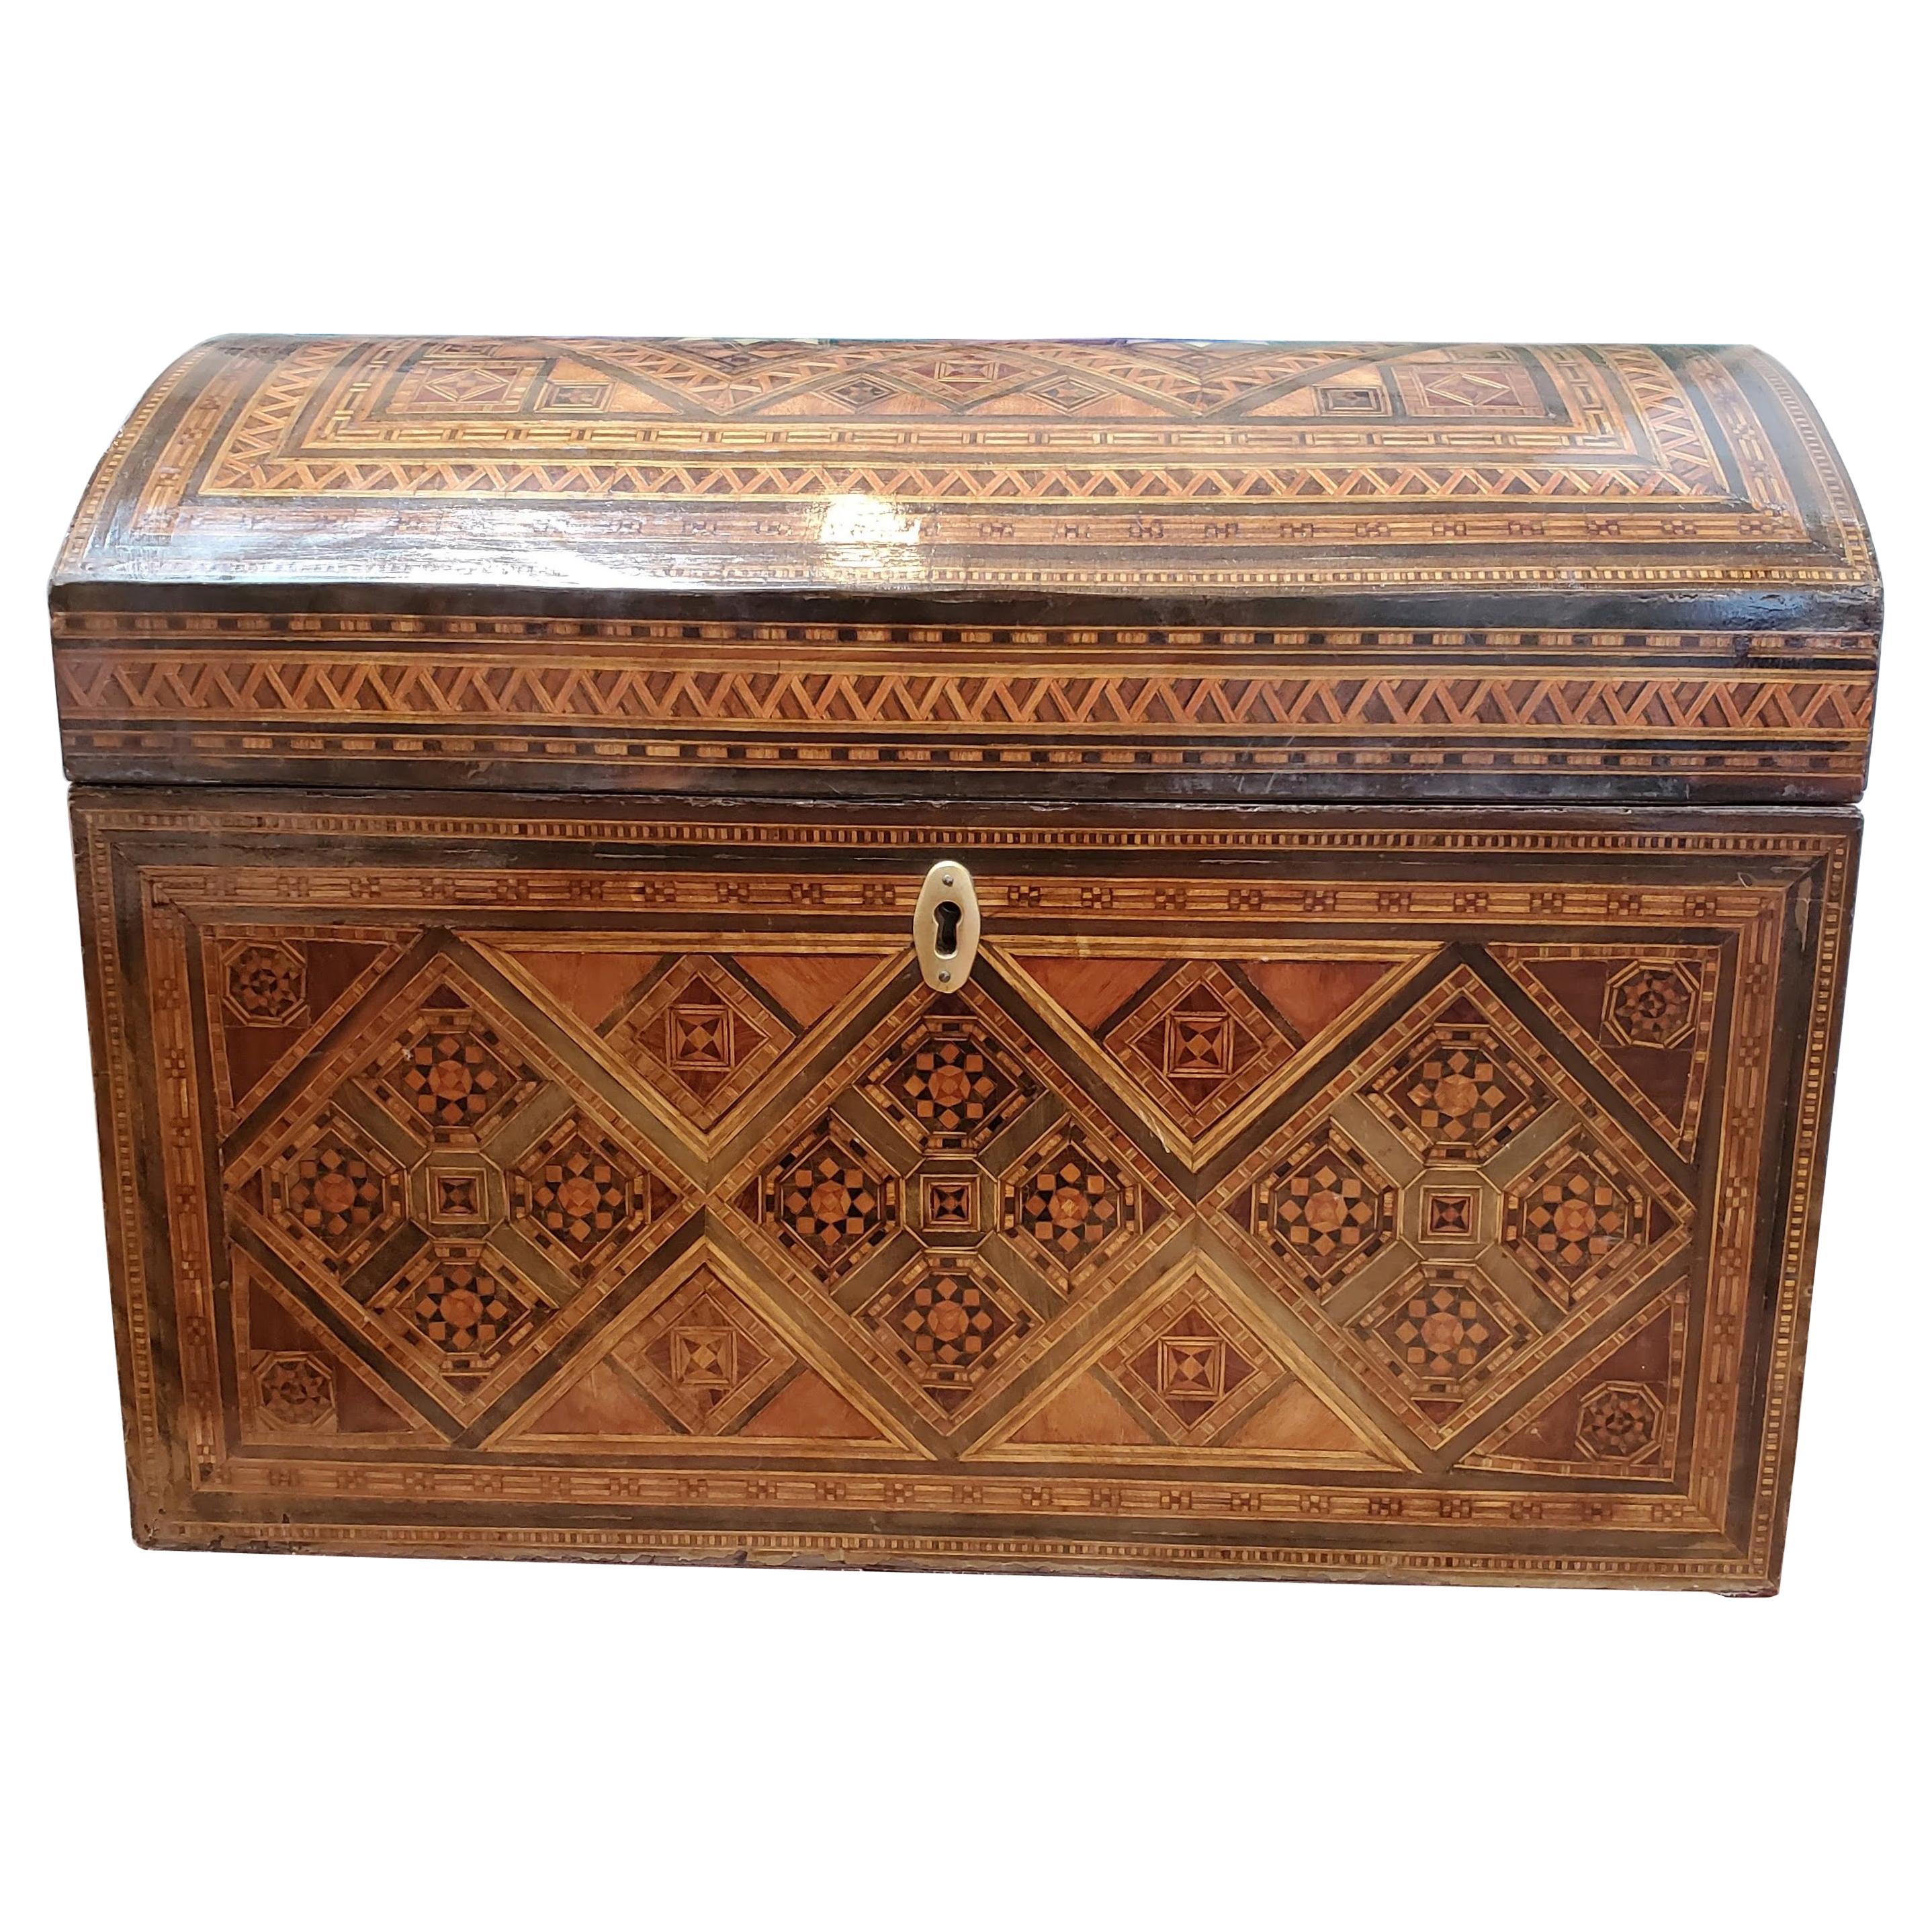 Large 19th Century Syrian Domed Box Inlaid with Exotic Woods & Mother of Pearl